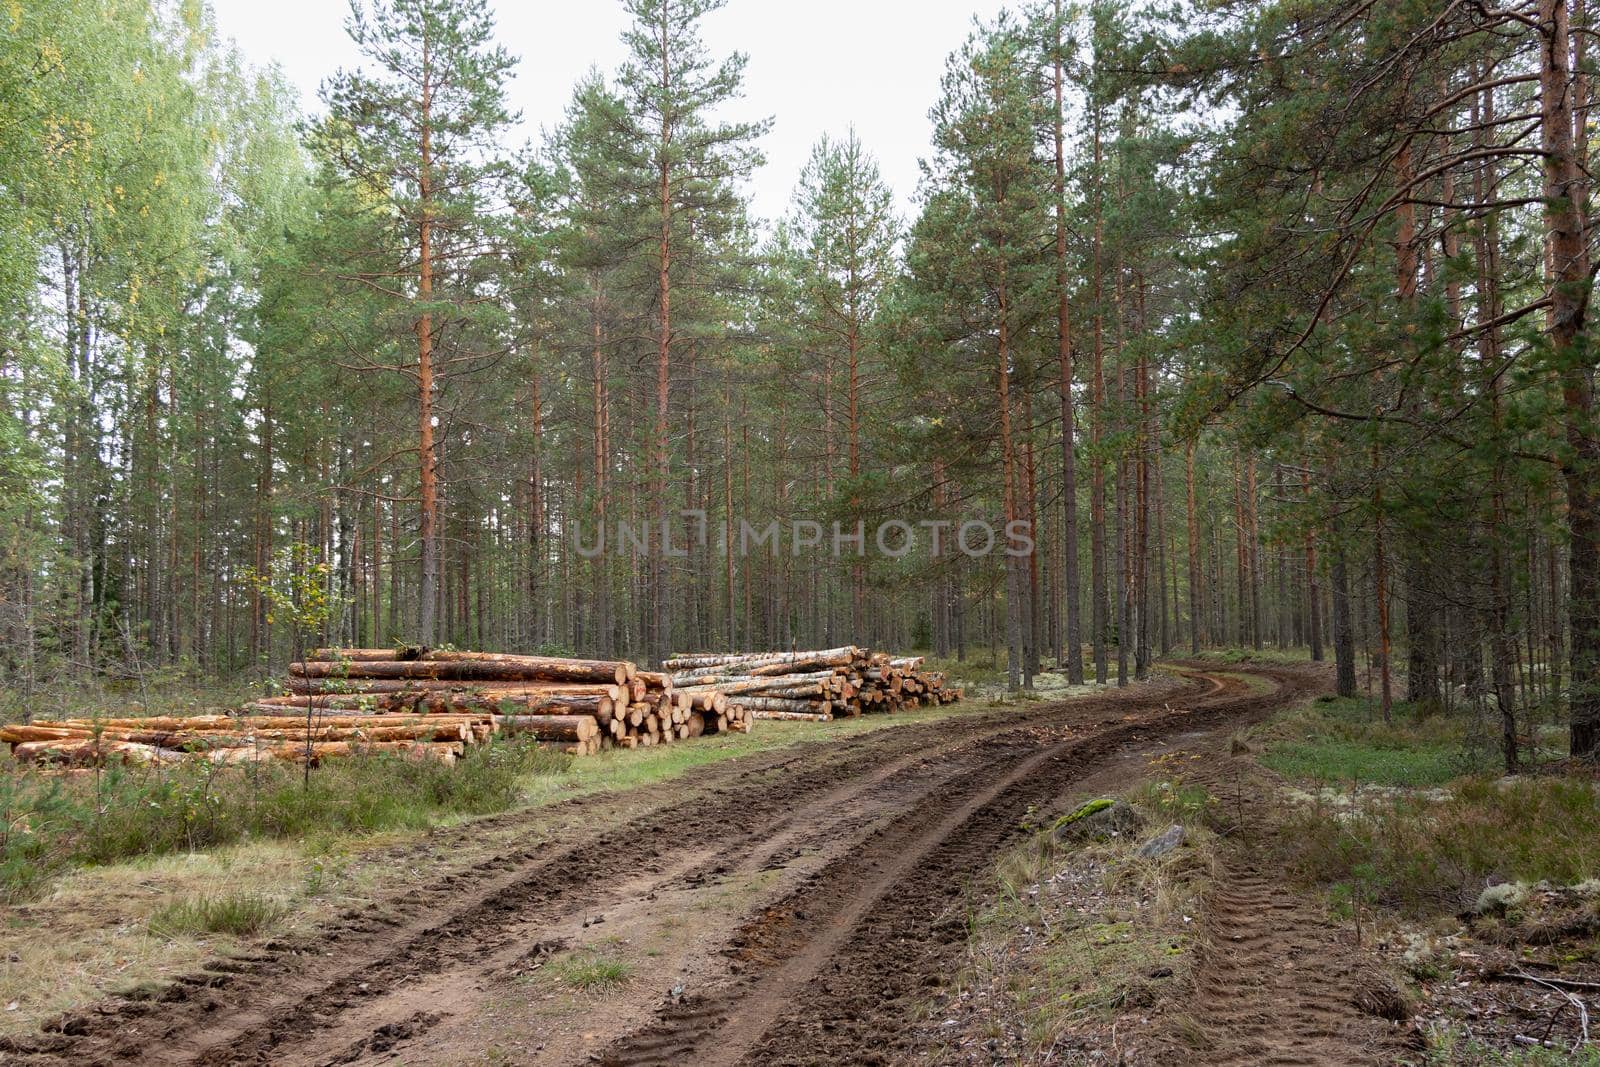 Logging. Sawed pine logs stacked in the forest, near the road.